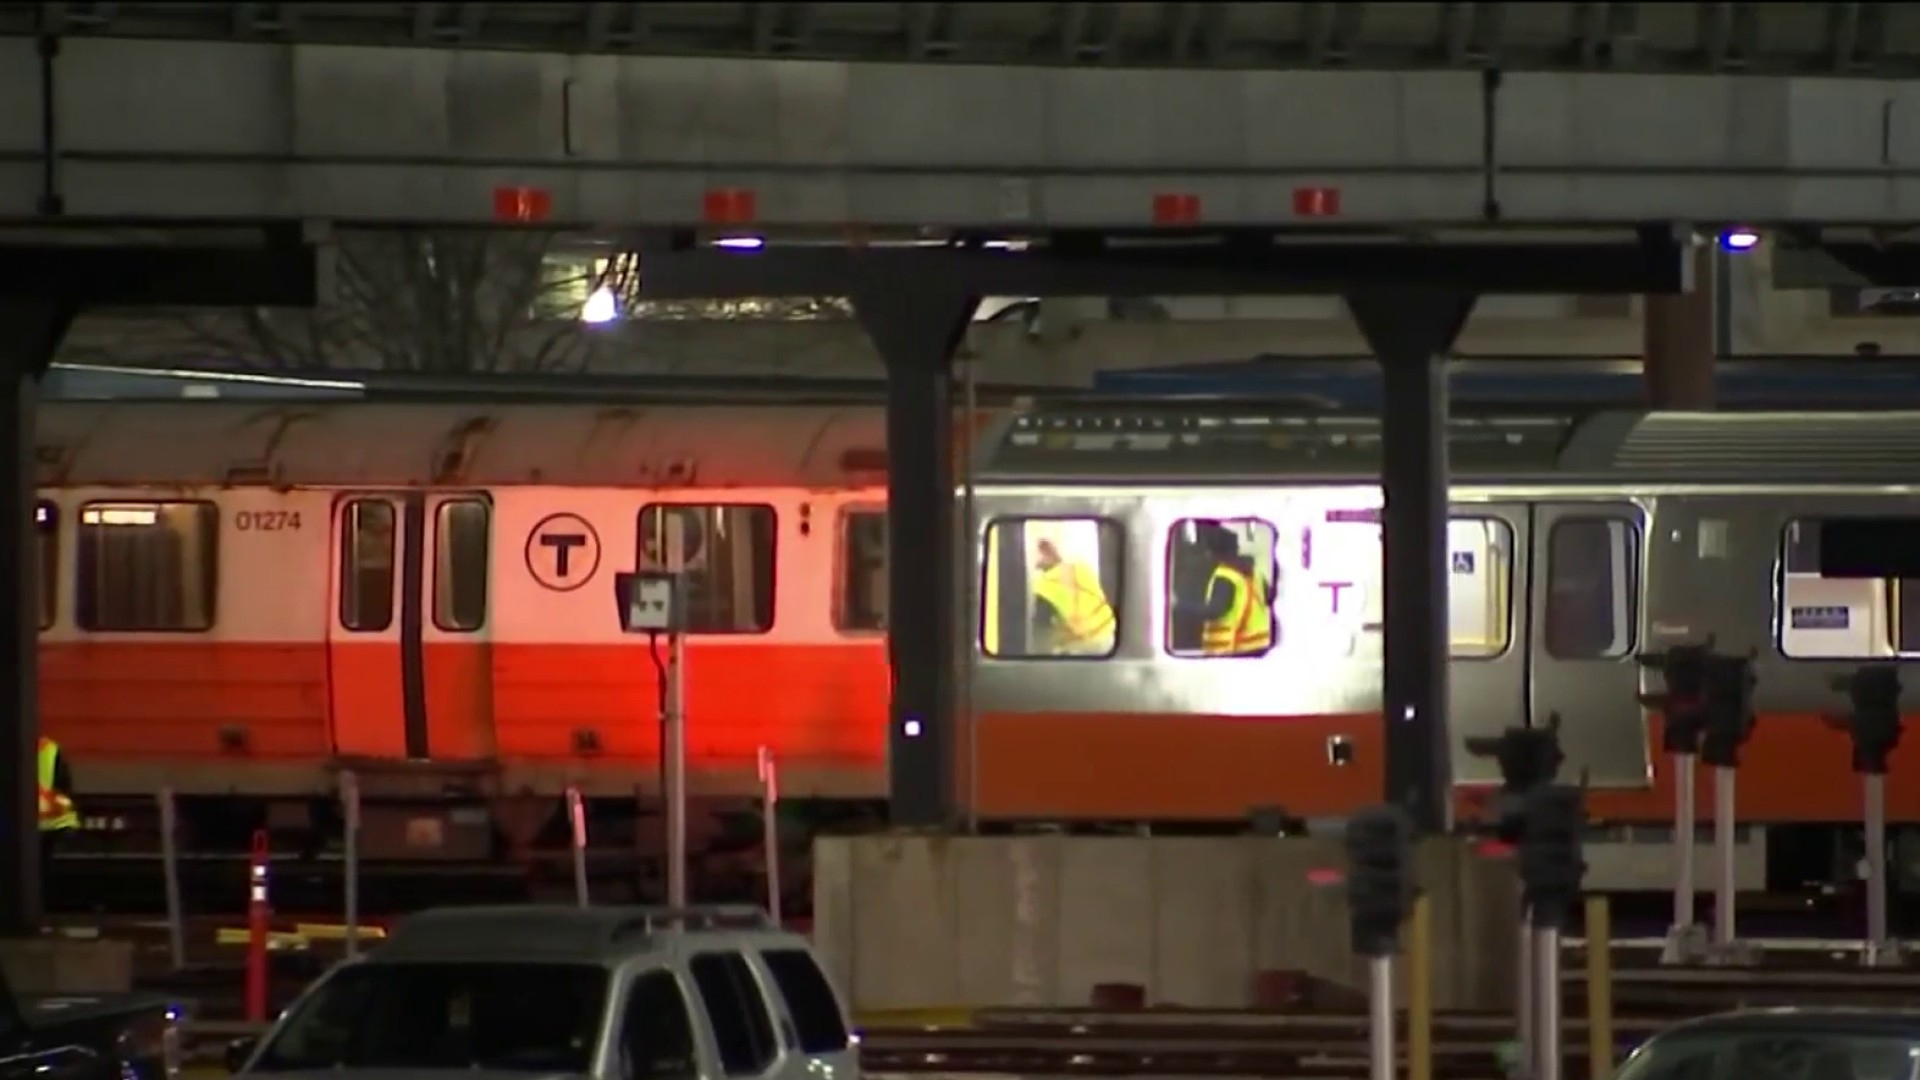 Boston Welcomes Visitors for New Year's Amid Orange Line Repairs